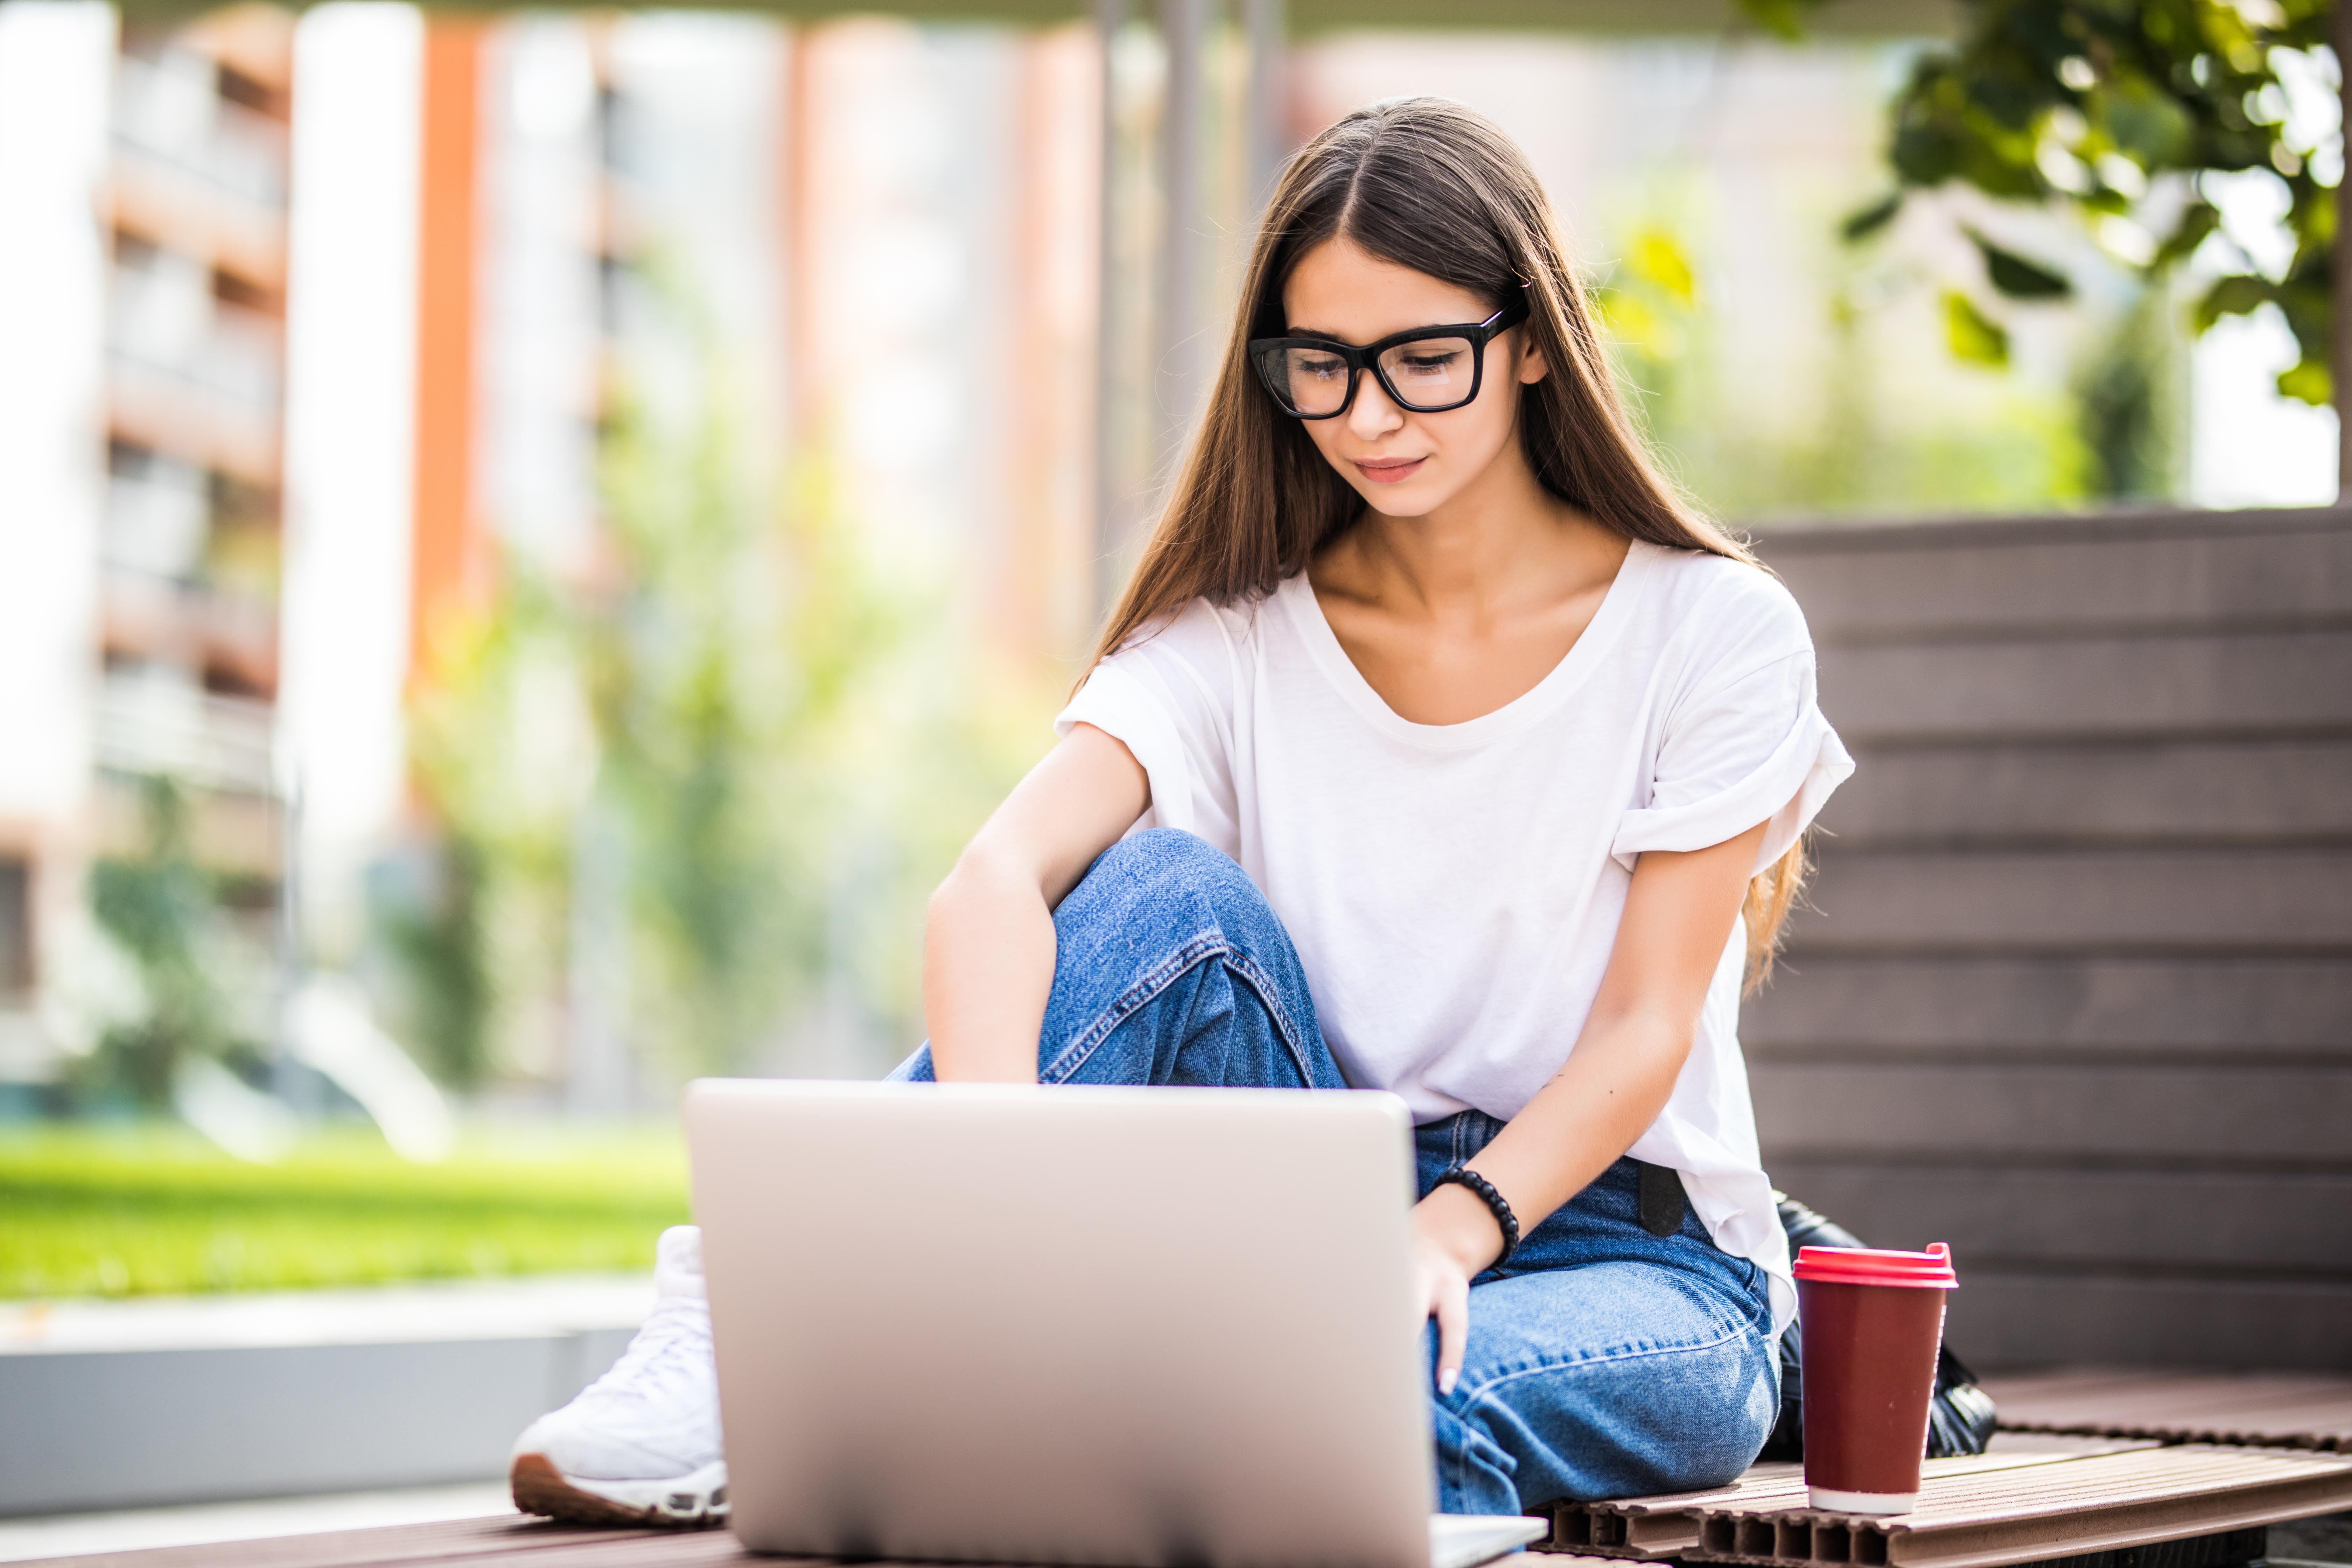 beautiful-young-woman-using-laptop-while-sitting-bench-drinking-takeaway-coffee-cup.jpg